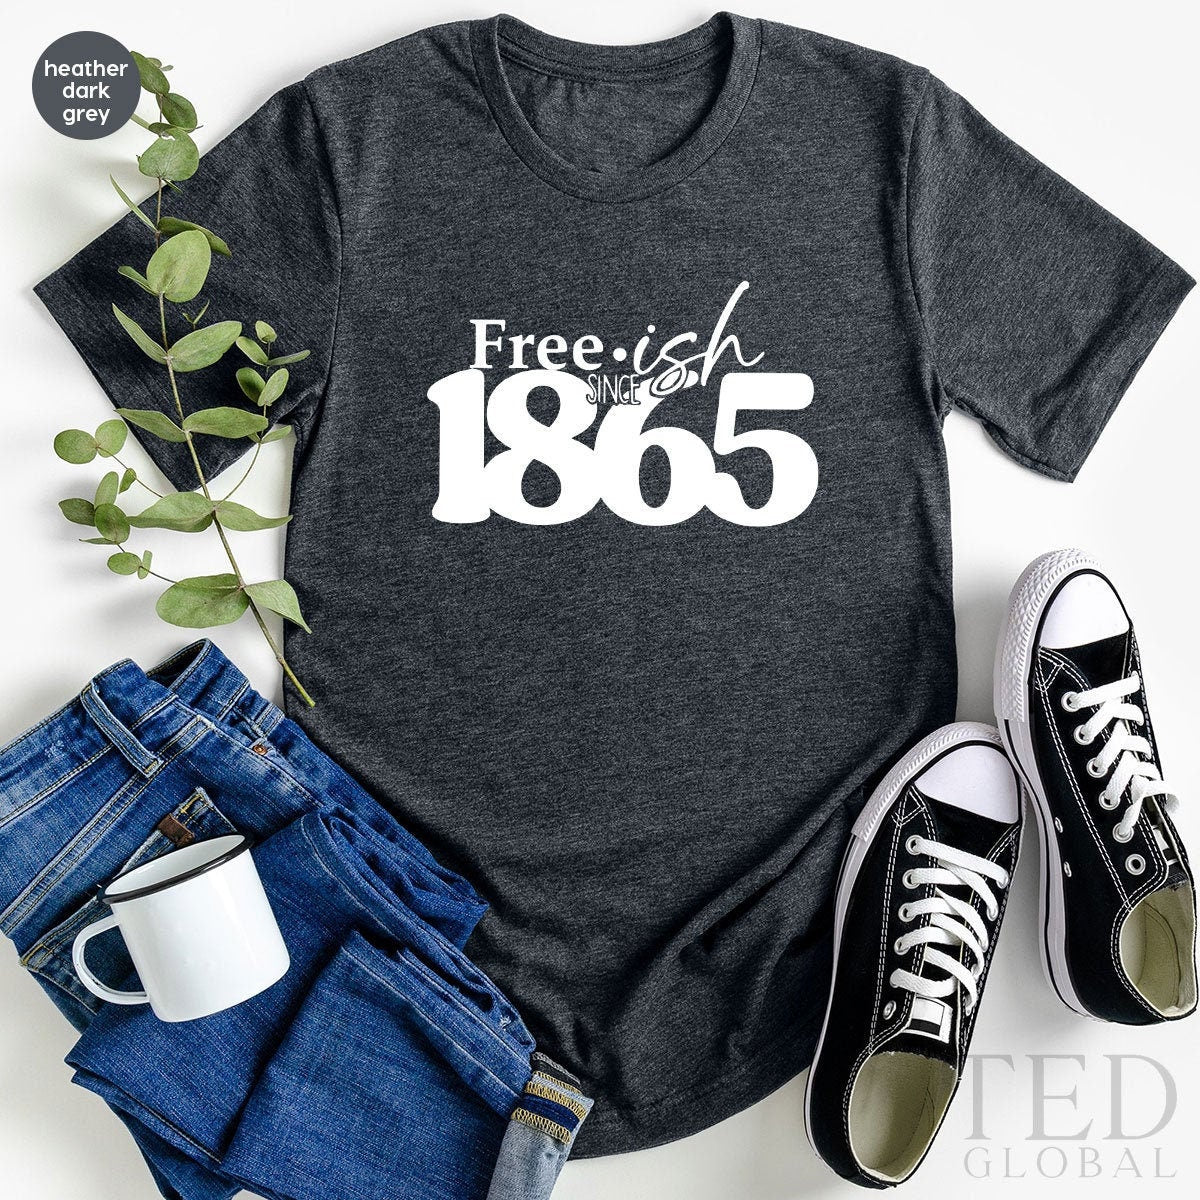 Juneteenth Shirt, Black Culture T Shirt, Free-ish  1865 TShirt,  Black History, Proud African American, Black Live Matter, Independence Day - Fastdeliverytees.com